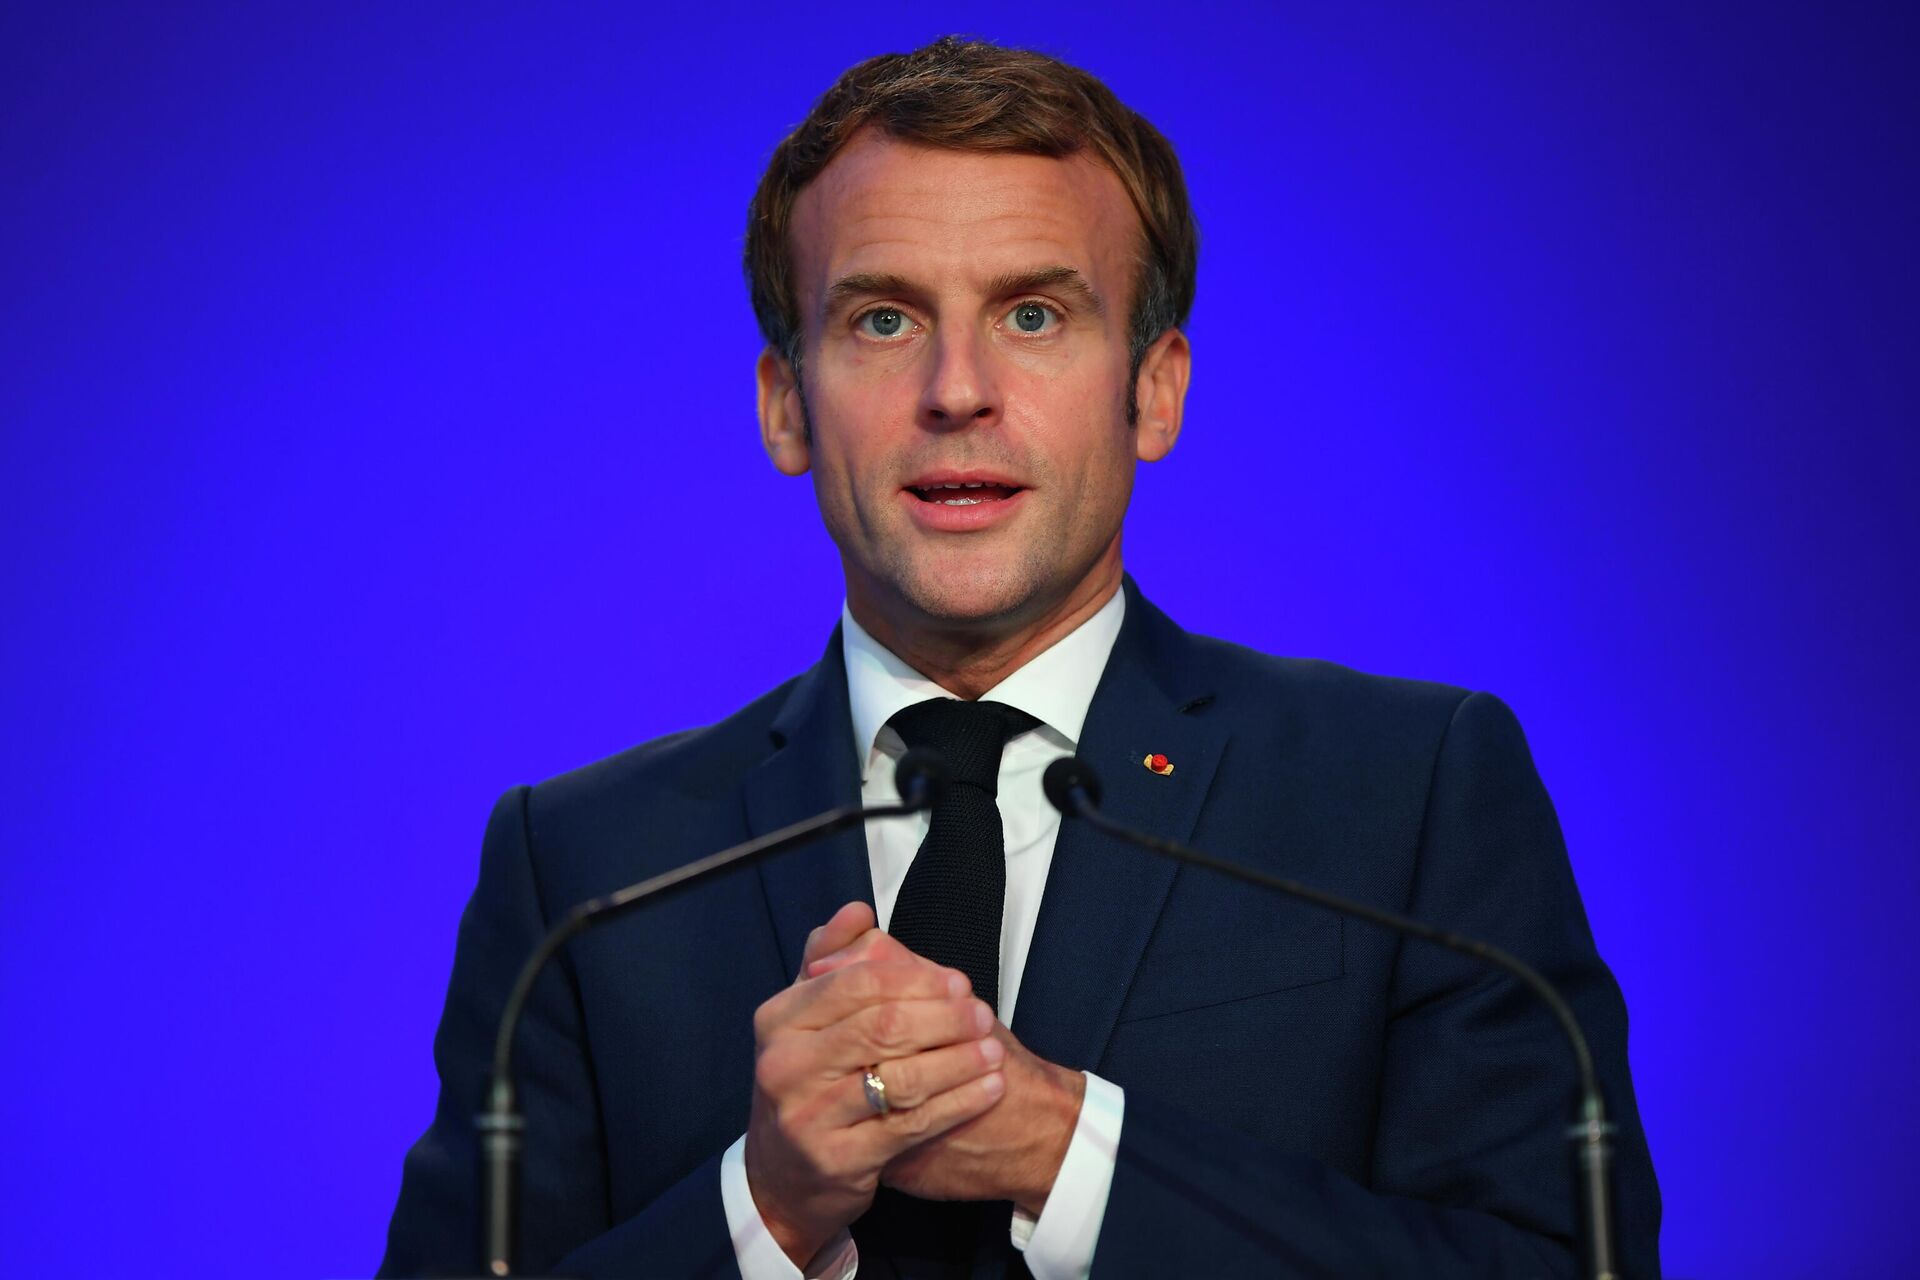 France's President Emmanuel Macron presents his national statement as a part of the World Leaders' Summit at the UN Climate Change Conference (COP26) in Glasgow, Scotland, Britain November 1, 2021 - Sputnik International, 1920, 02.12.2021